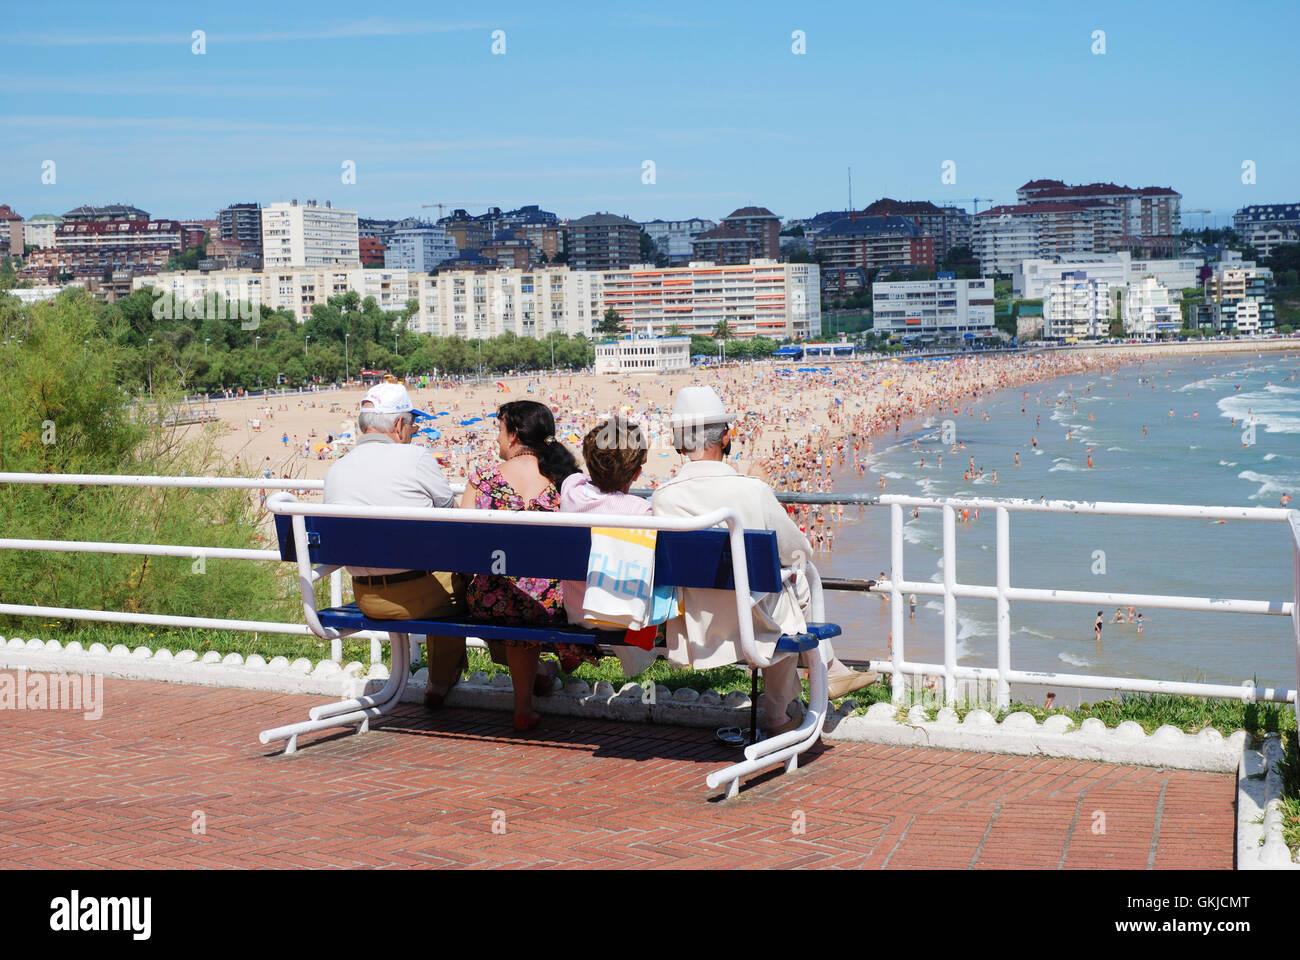 Four people sitting on a bench looking at the beach. Piquio gardens, Santander, Spain. Stock Photo